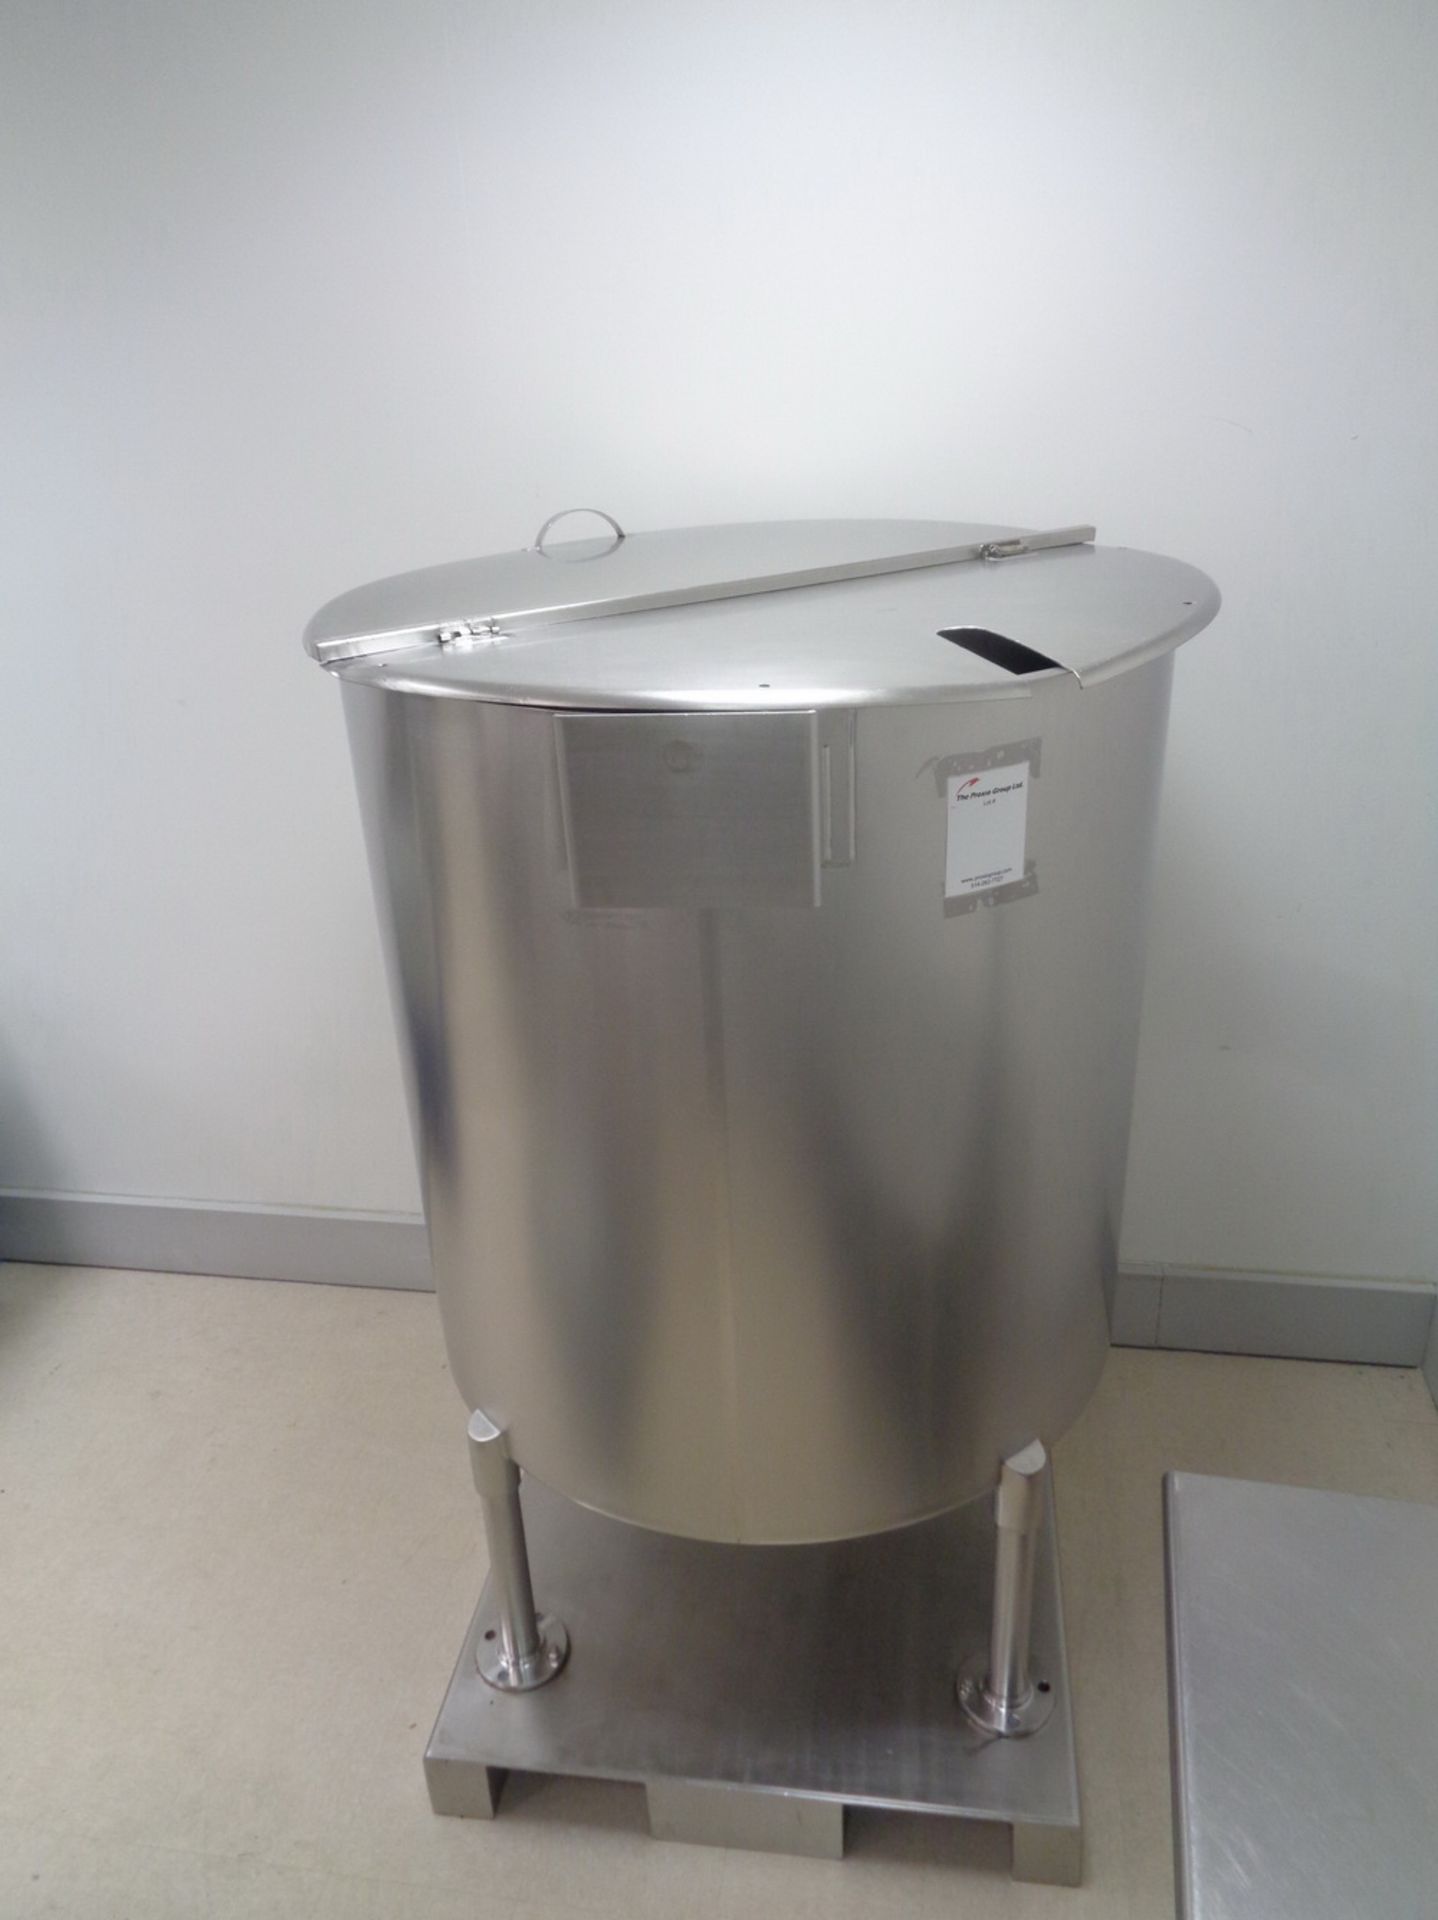 G&W 300 GAL CAPACITY STAINLESS STEEL TANK, SERIAL NUMBER T-96-13593. WITH DISH BOTTOM - Image 4 of 6